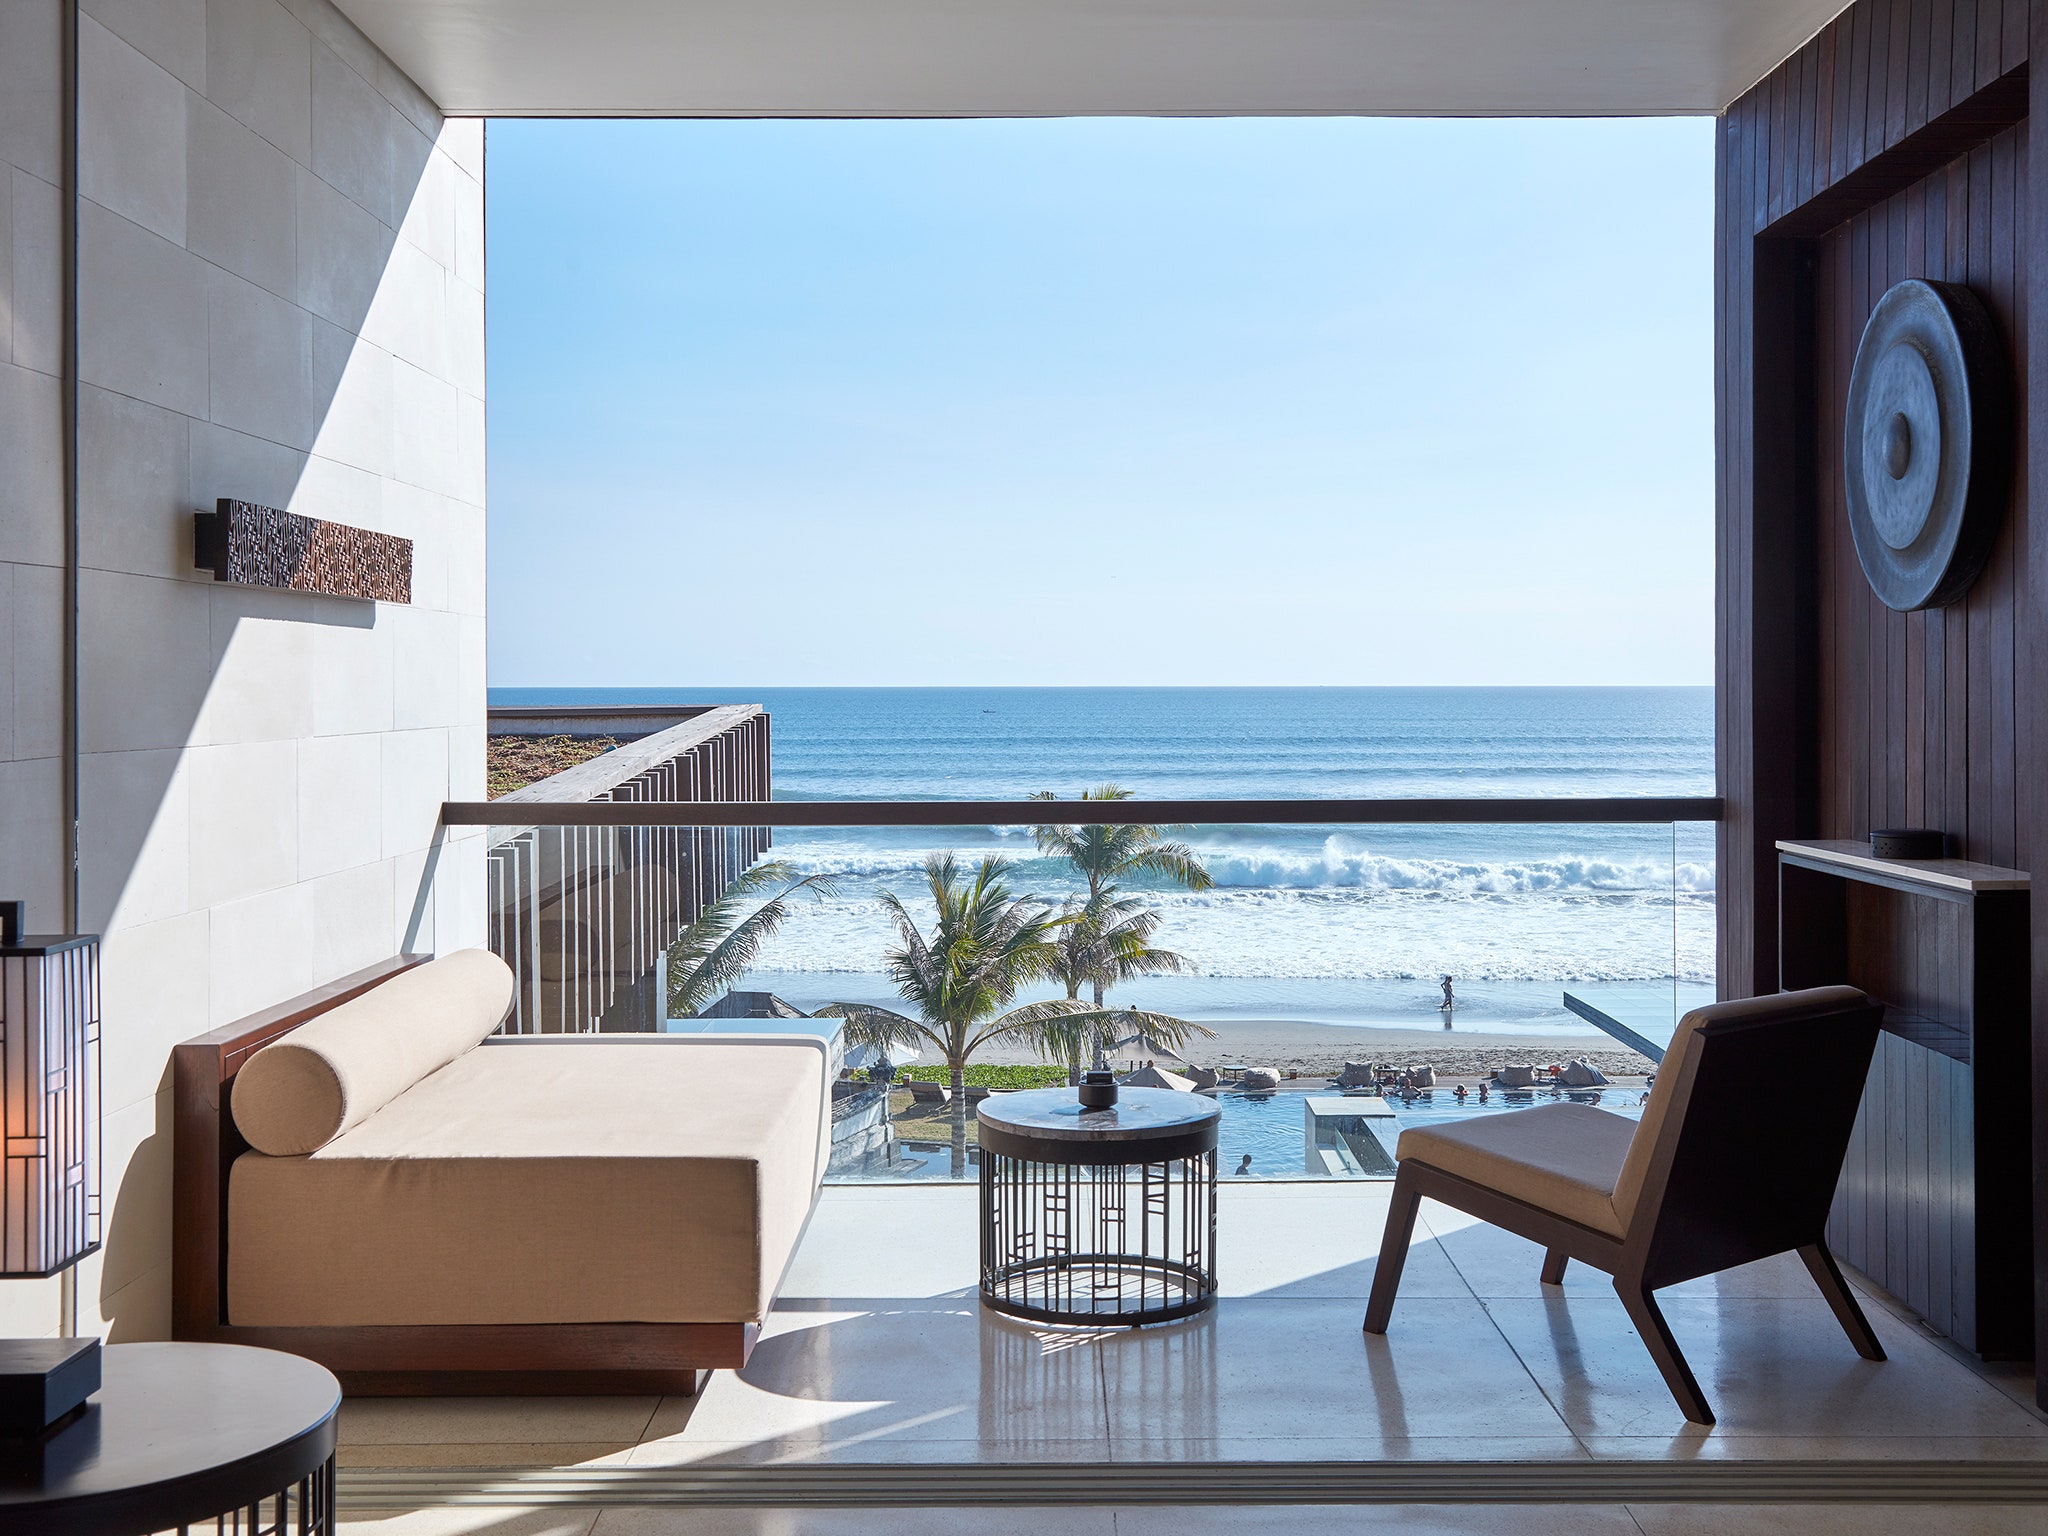 A slick, 240-room beachside complex, Alila Seminyak is where the cool kids come to play when they hit Bali. Its low-key, albeit high-luxe design—think clean lines, minimalist furniture, and a buzzy rooftop watering hole—helps it to fit right in with its surroundings. (The nearby neighborhood of Petitenget caters to a similar demographic, home to a cluster of top-line boutiques and trendy cafés). Start your day with one of the resort's daily, early-morning yoga classes or a session at the 24-hour gym, then hang back by one of the <em>five</em> pools until it's time to hit the seafood-driven Seasalt restaurant. <em>—Betsy Blumenthal</em><p>Sign up to receive the latest news, expert tips, and inspiration on all things travel</p><a href="https://www.cntraveler.com/newsletter/the-daily?sourceCode=msnsend">Inspire Me</a>